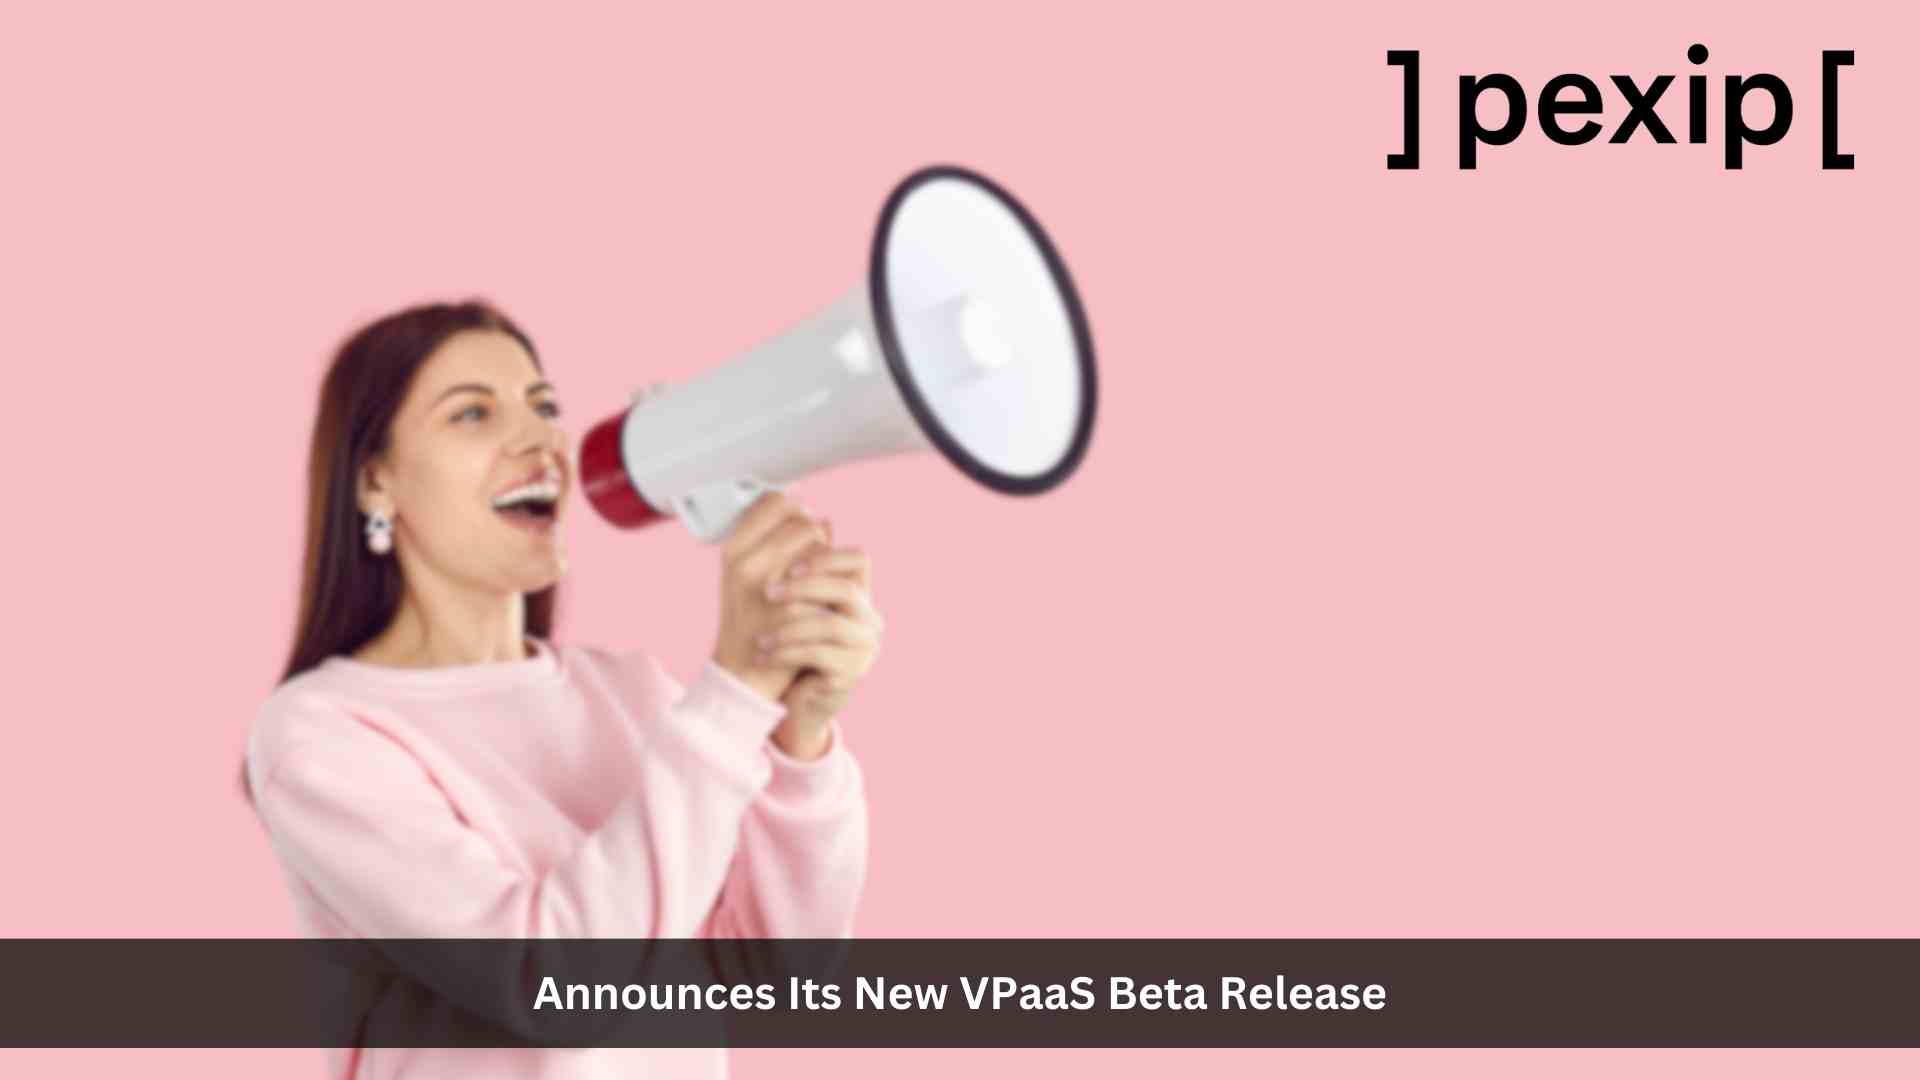 Pexip releases programmable video platform beta to invited users